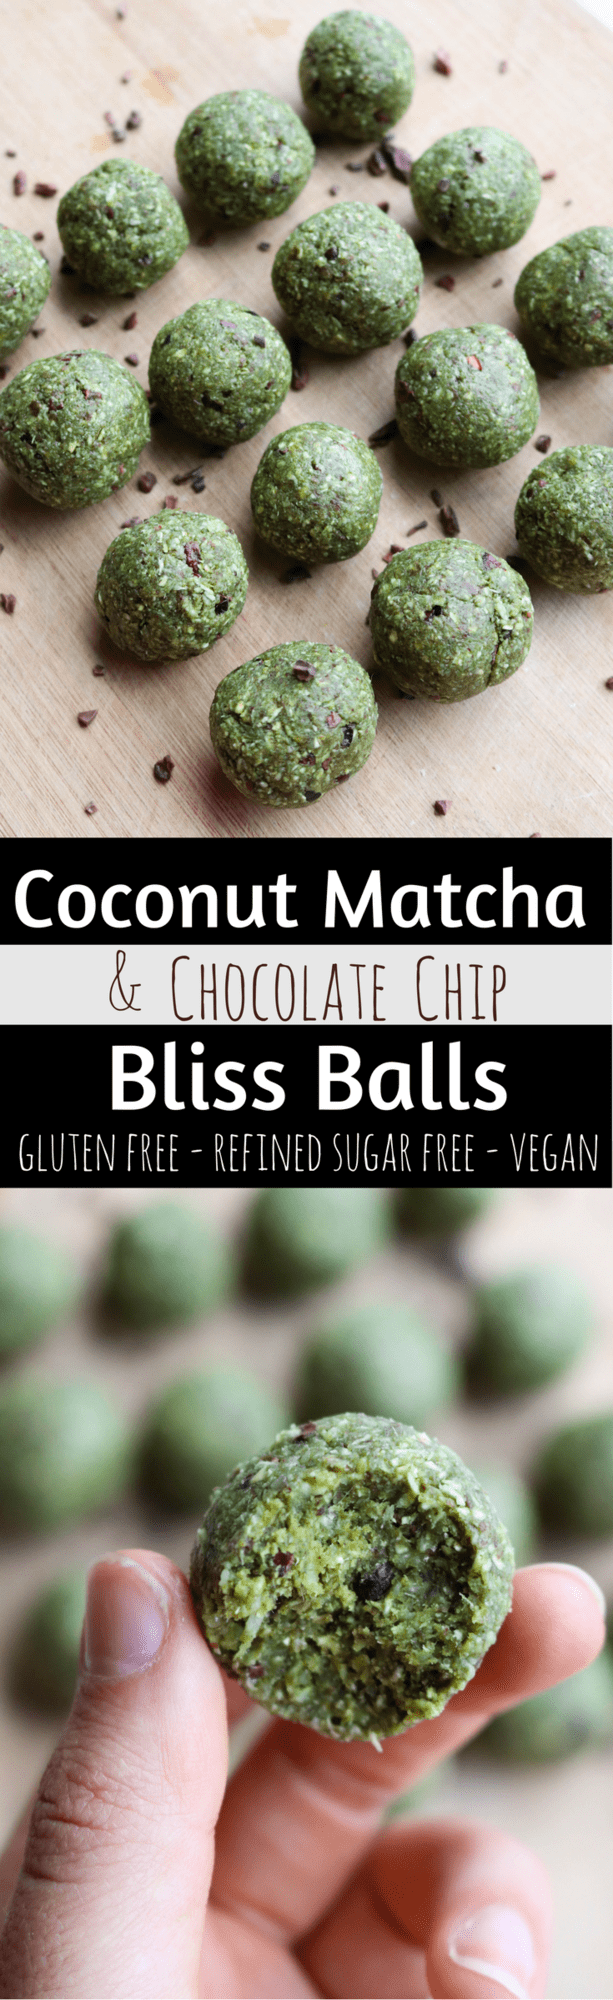 Coconut_Matcha_Chocolate_Chip_Bliss_Balls_FromMyBowl-5